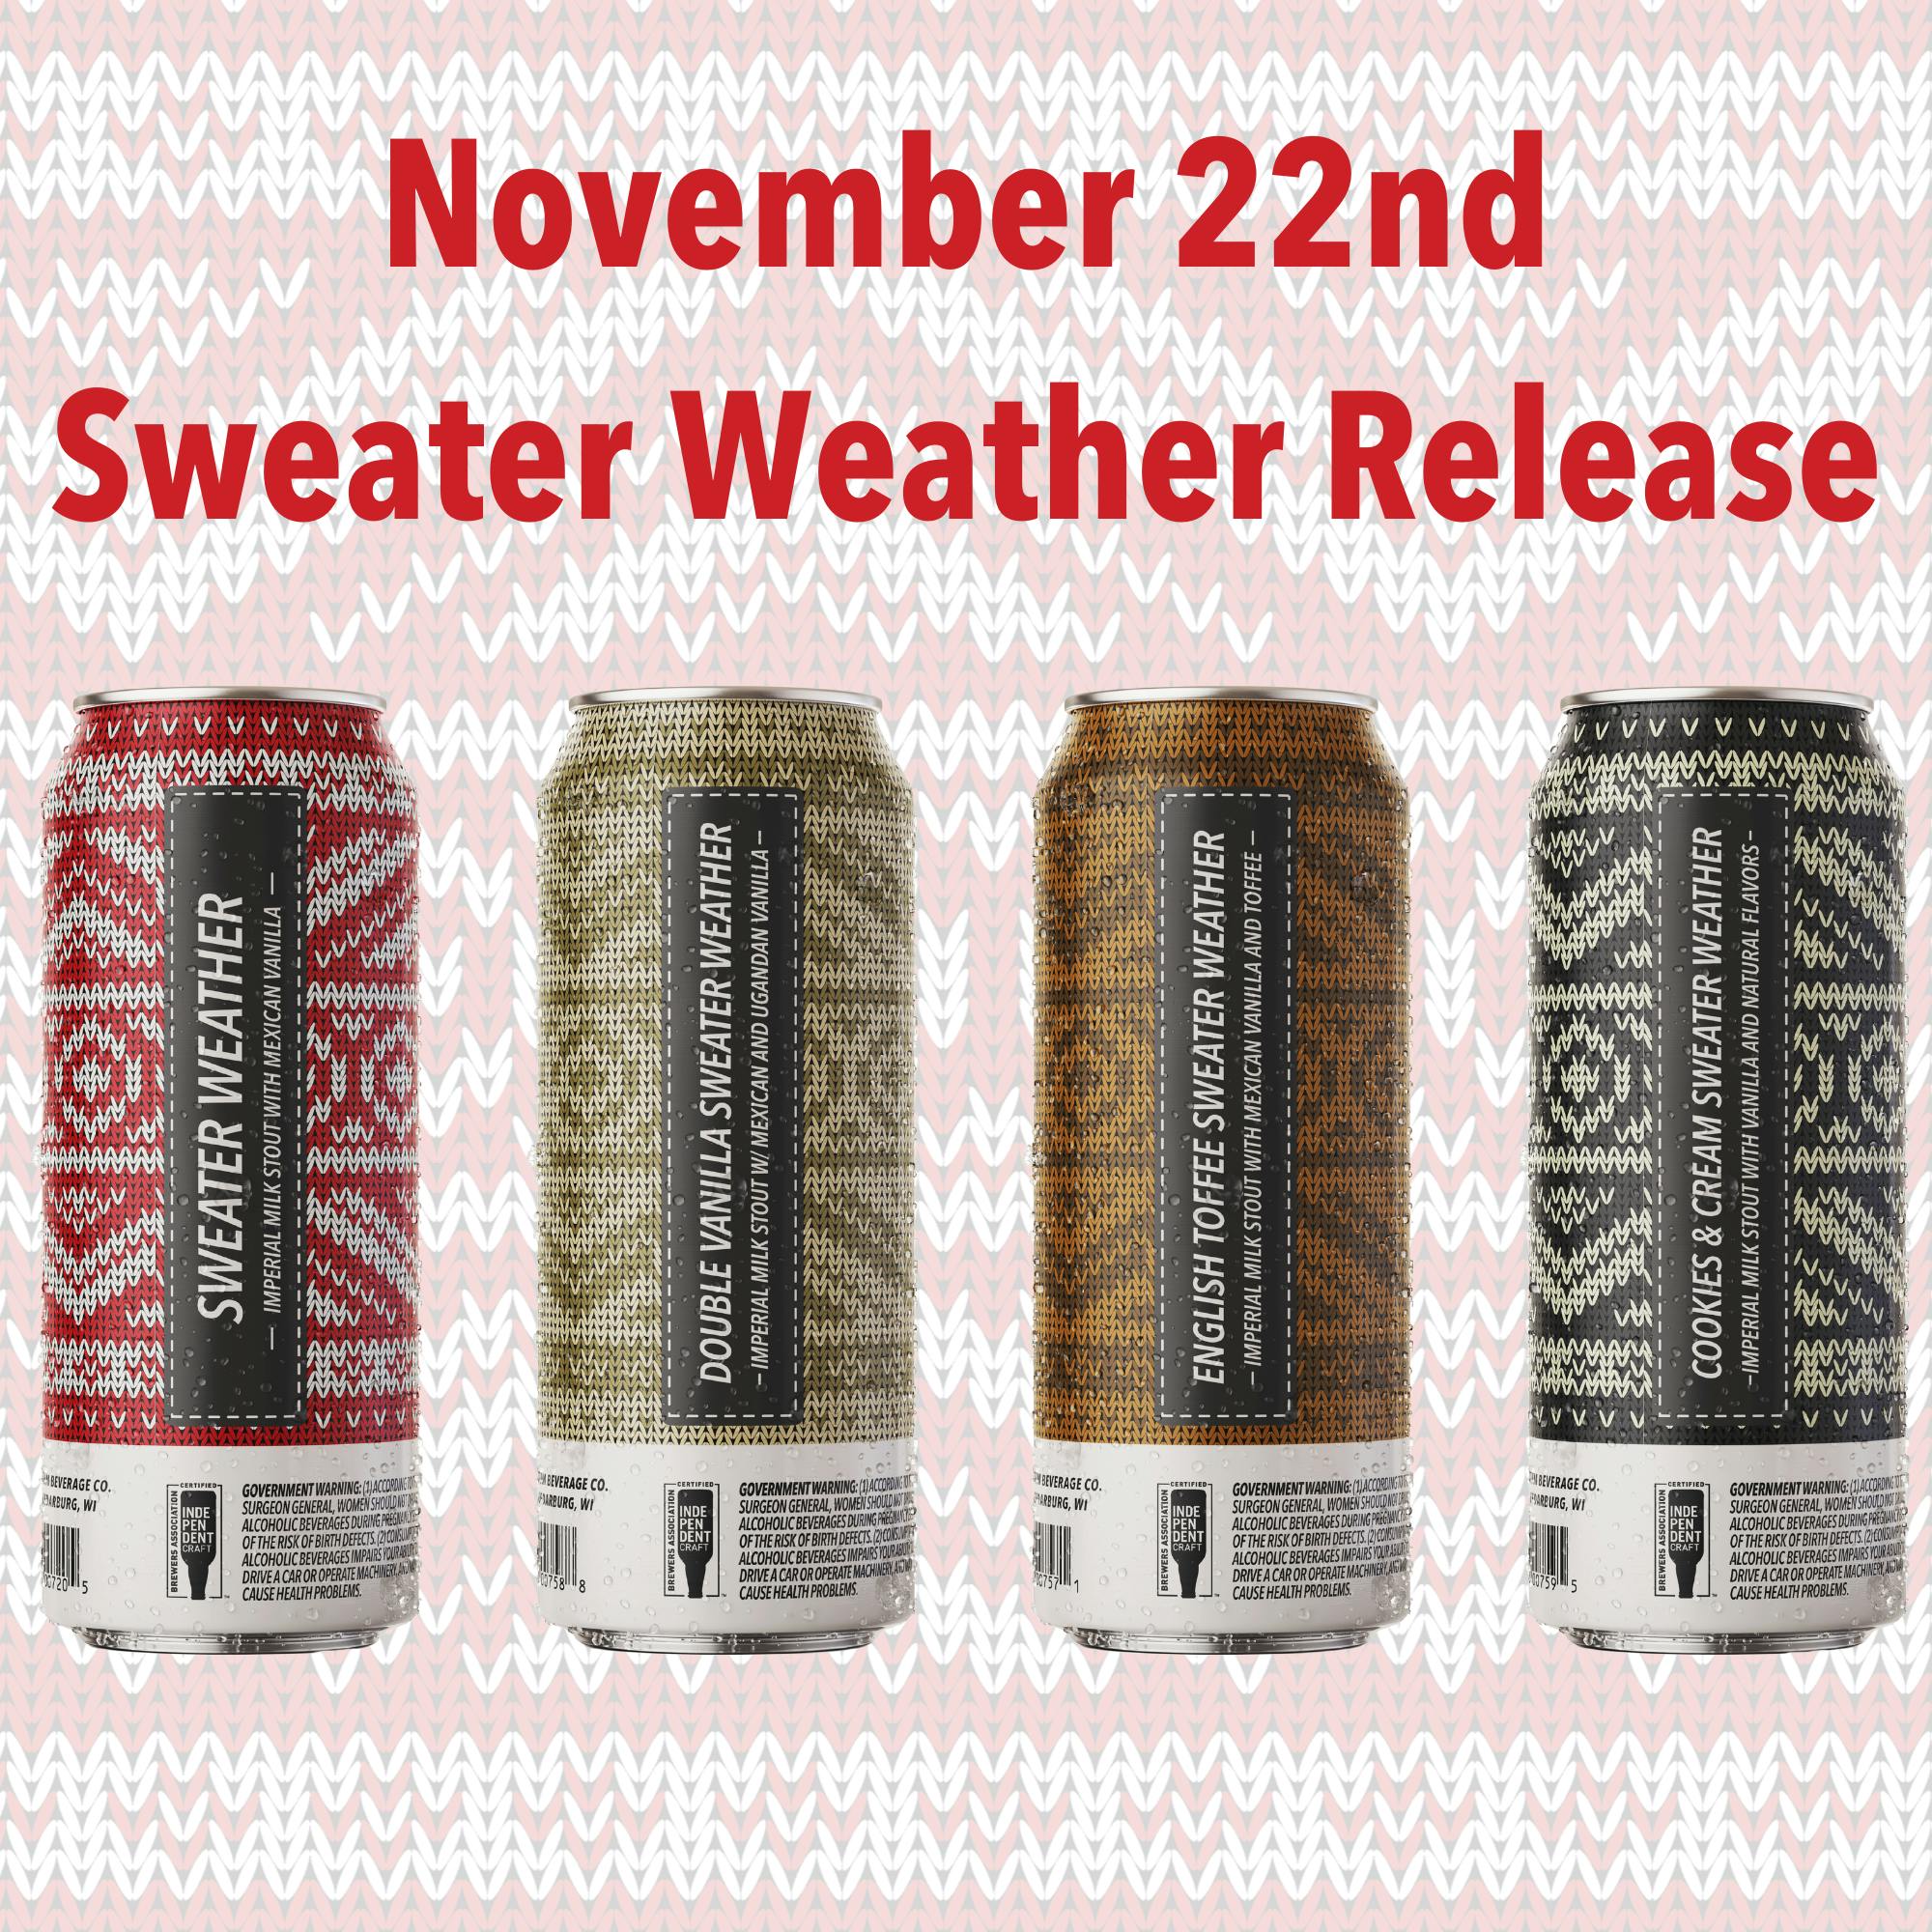 Sweater Weather Release